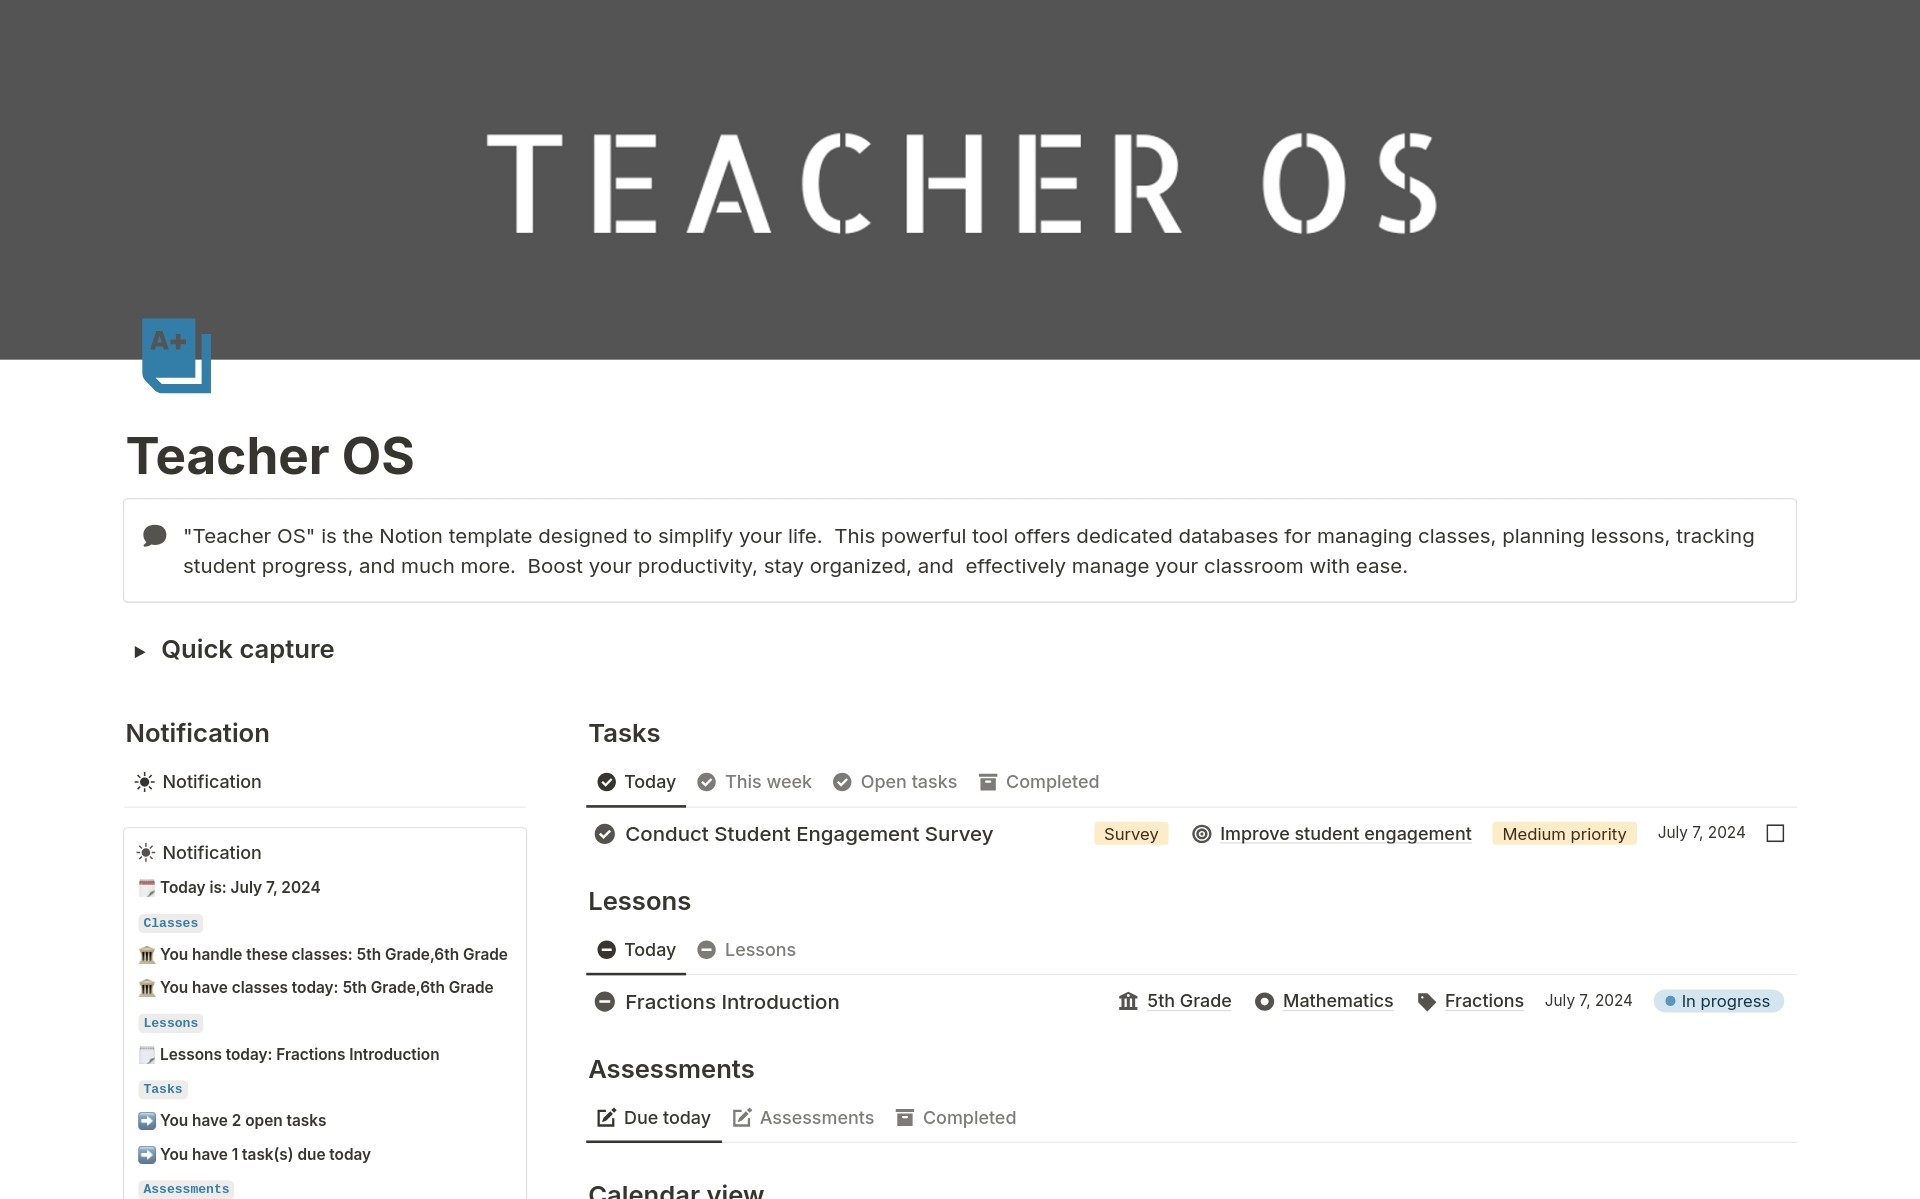 "Teacher OS" is the Notion template designed to simplify your life.  This powerful tool offers dedicated databases for managing classes, planning lessons, tracking student progress, and much more.  